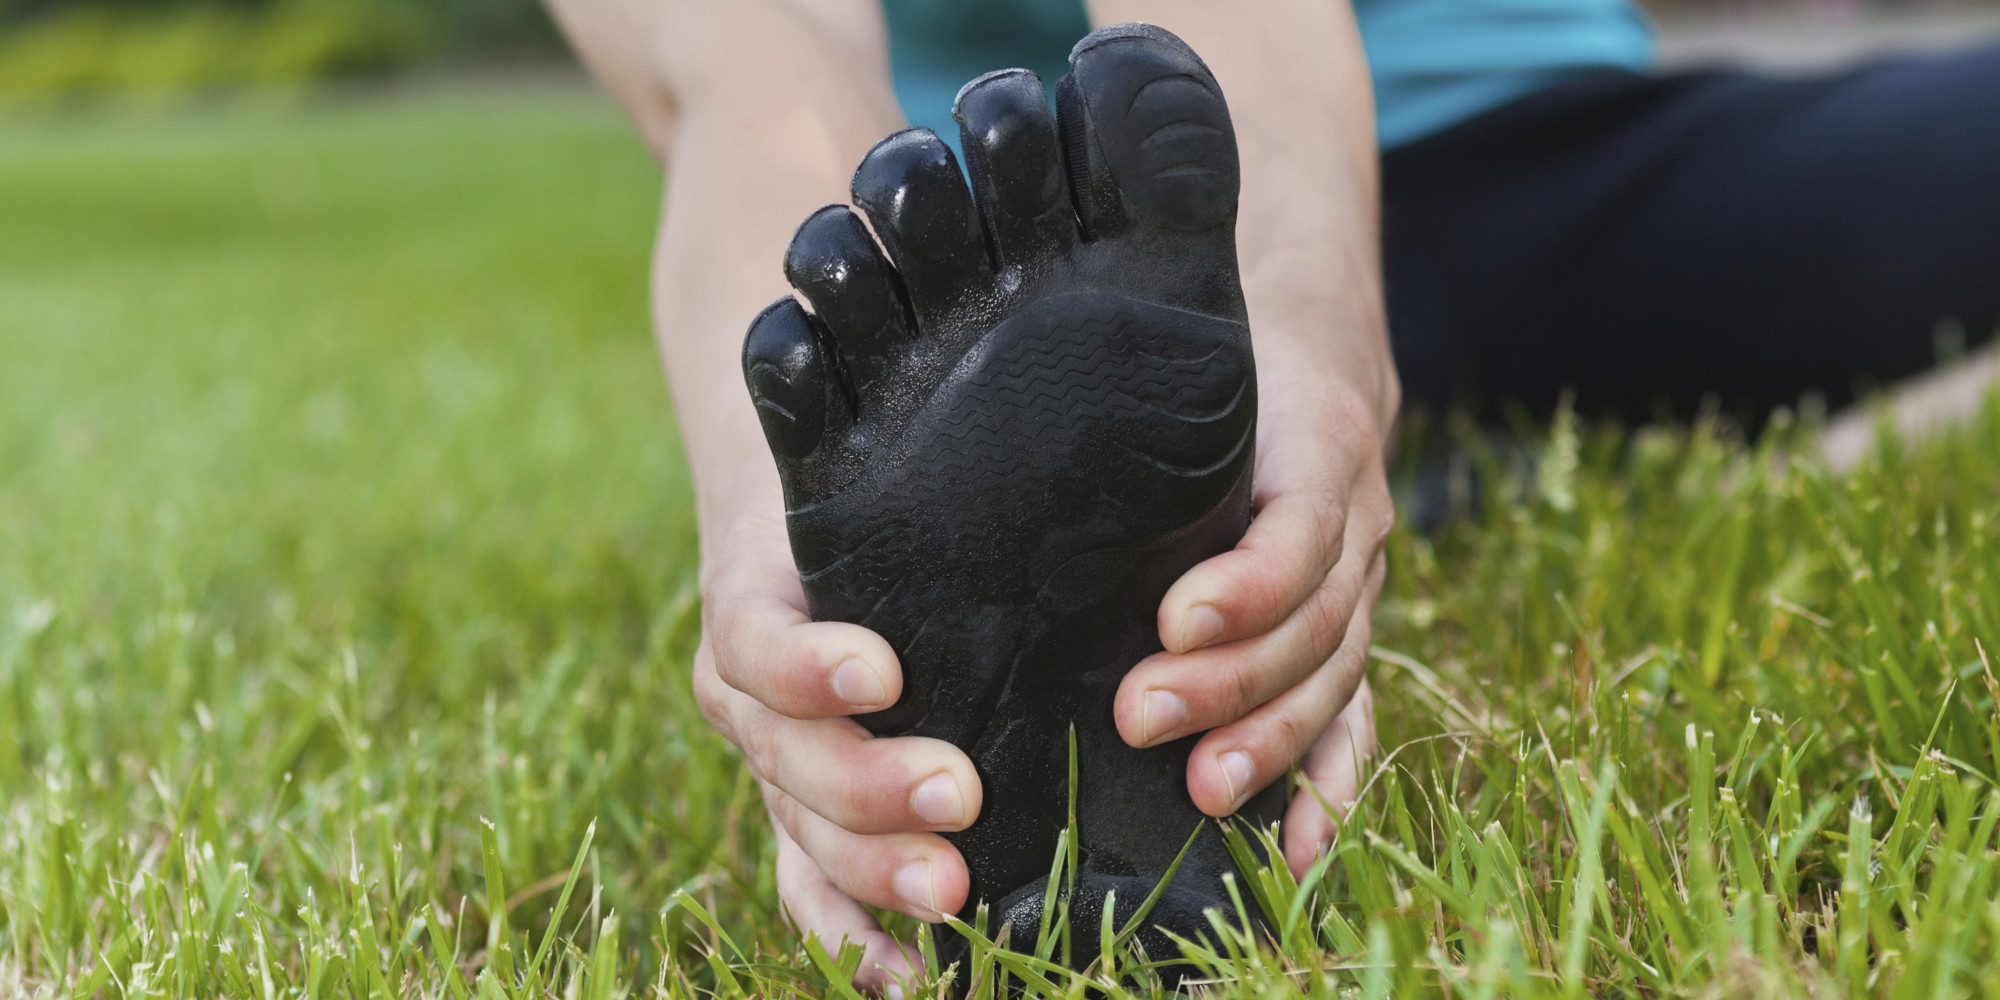 More Evidence To Make Your Transition To Barefoot Running Shoes A ...